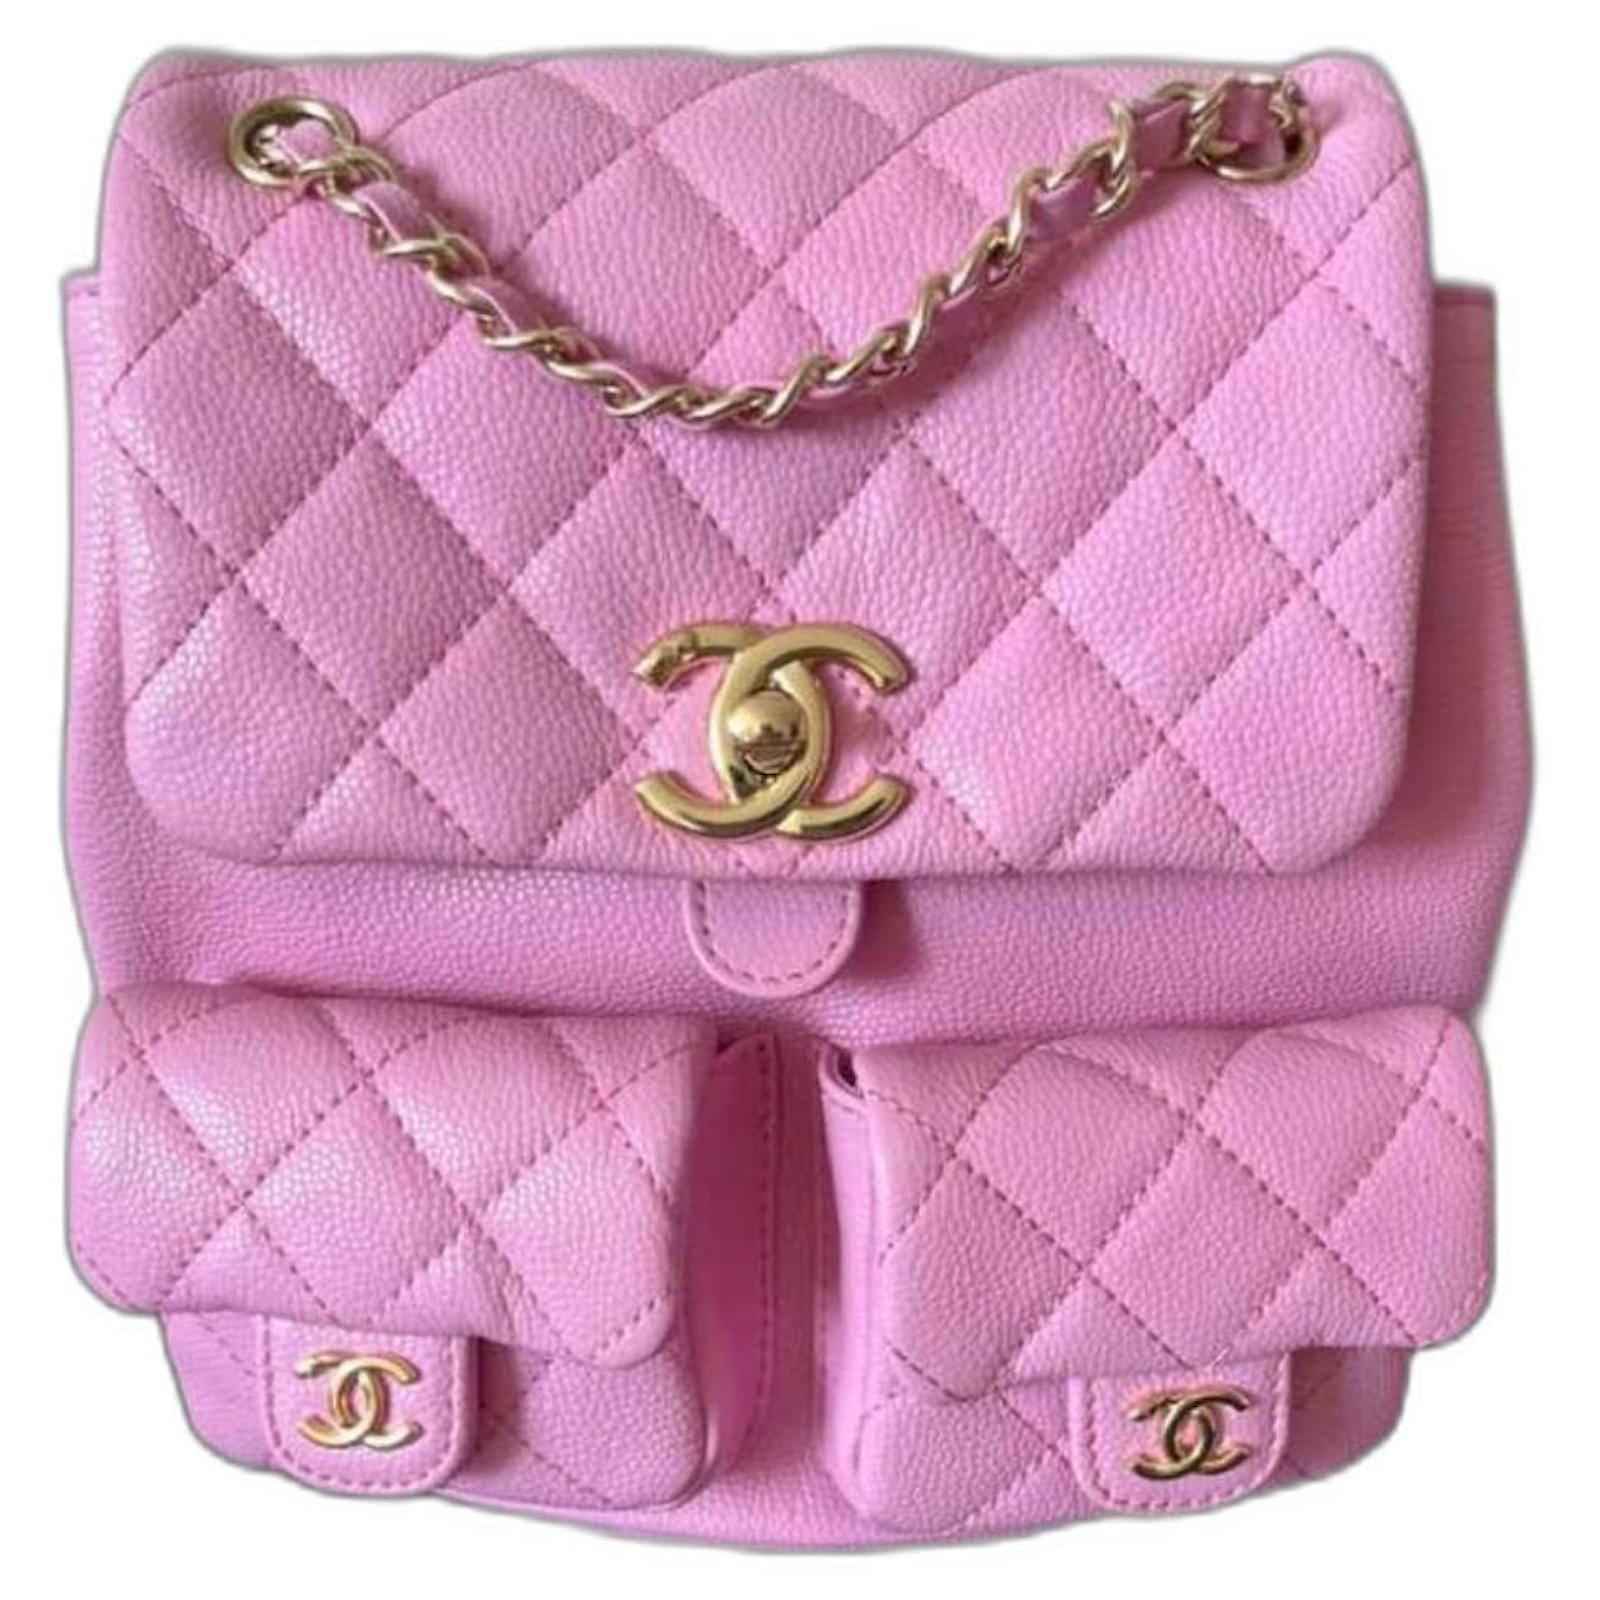 Executive 23P Chanel Backpack Timeless/ classique Pink Leather ref ...